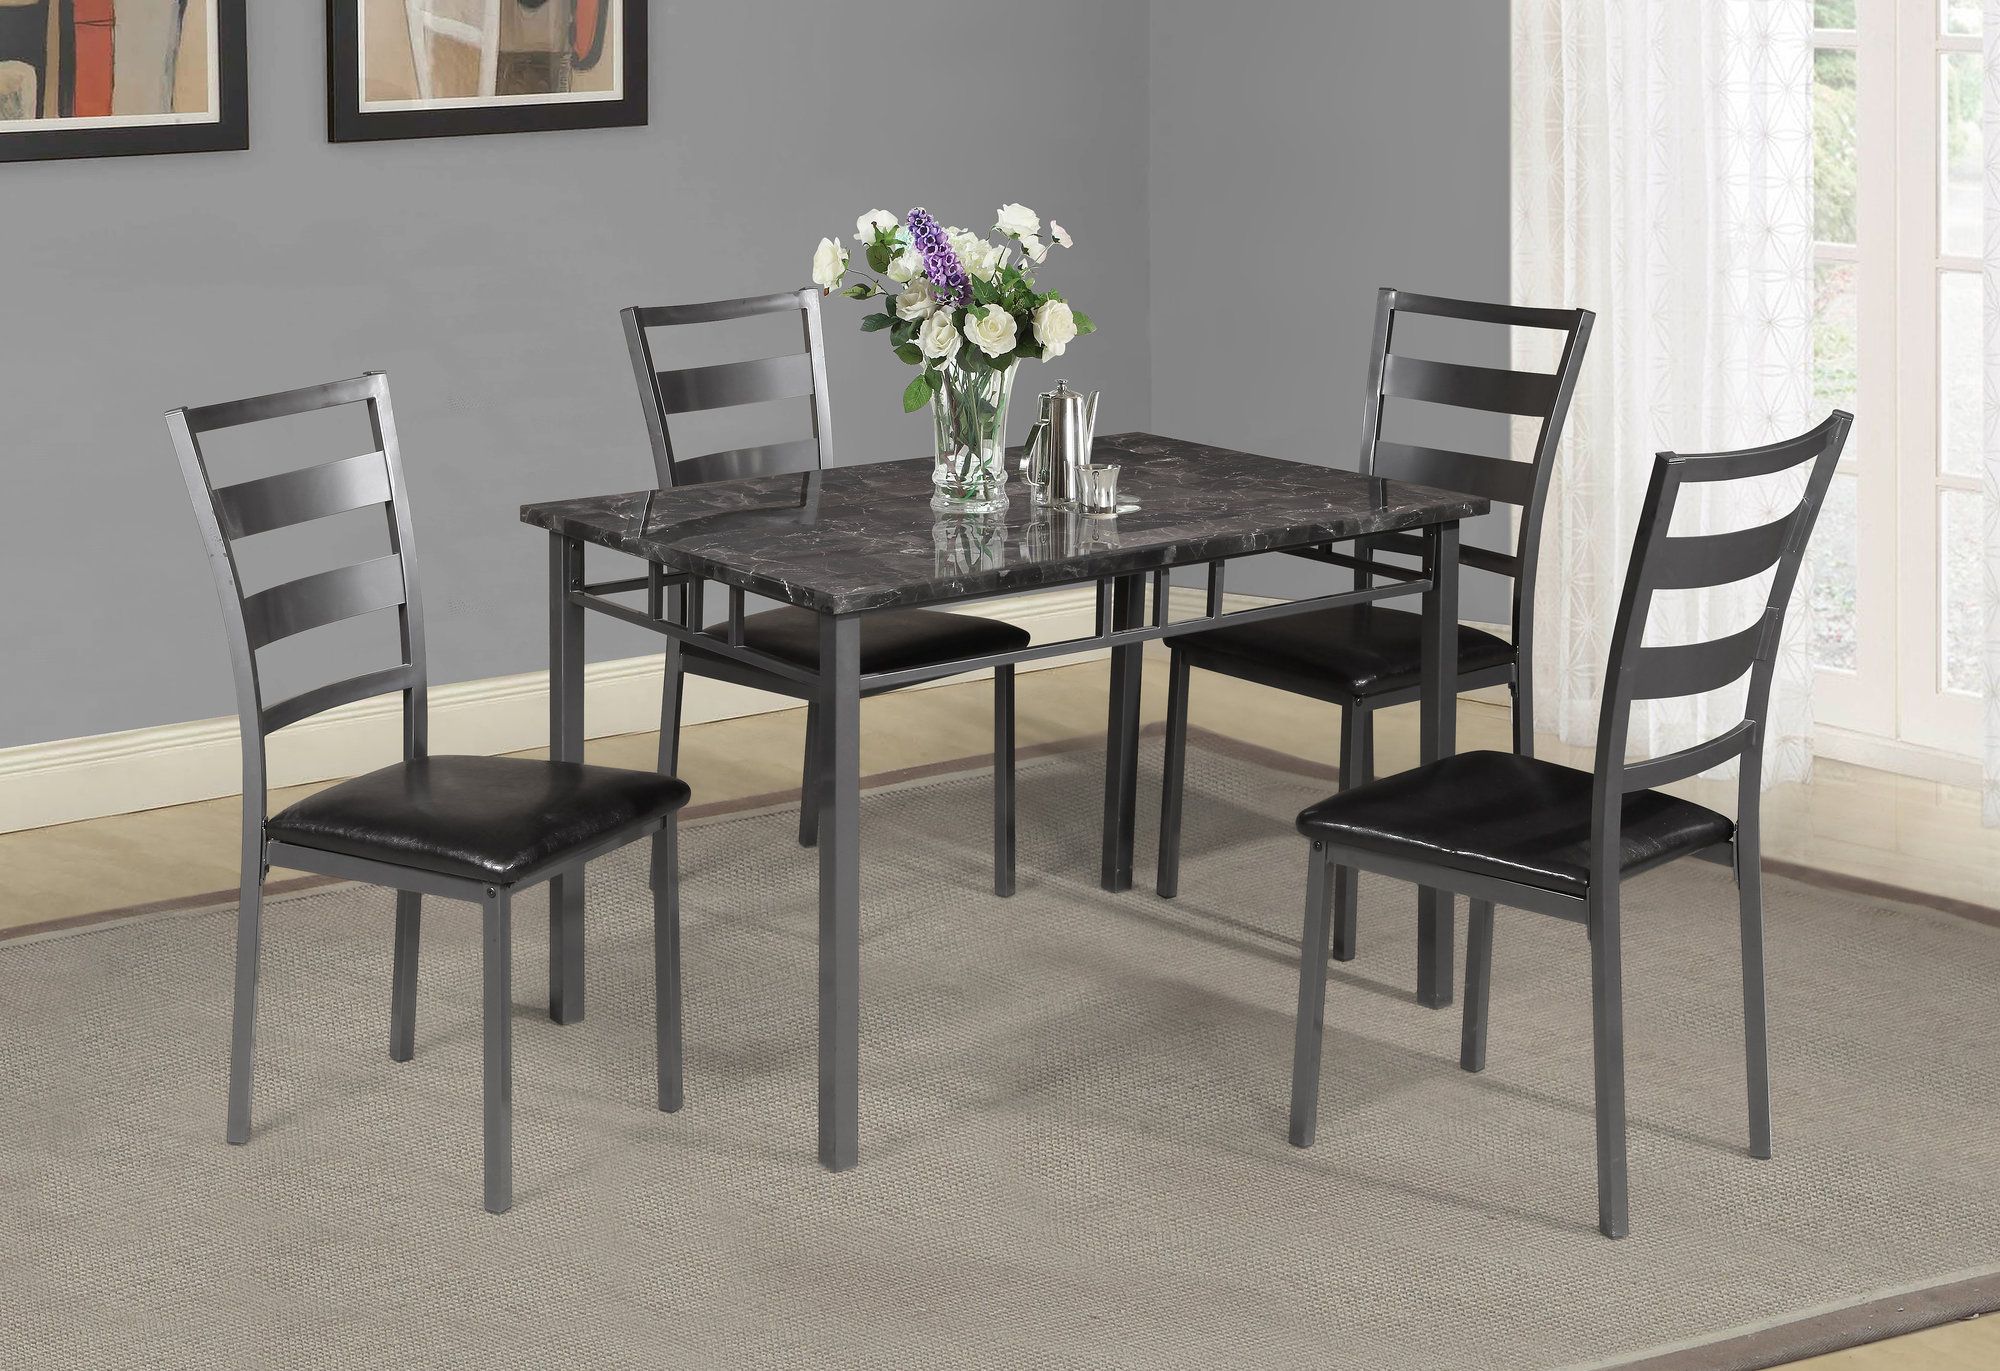 Yedinak 5 Piece Solid Wood Dining Sets In 2018 Details About Winston Porter Berke 5 Piece Dining Set (View 16 of 20)